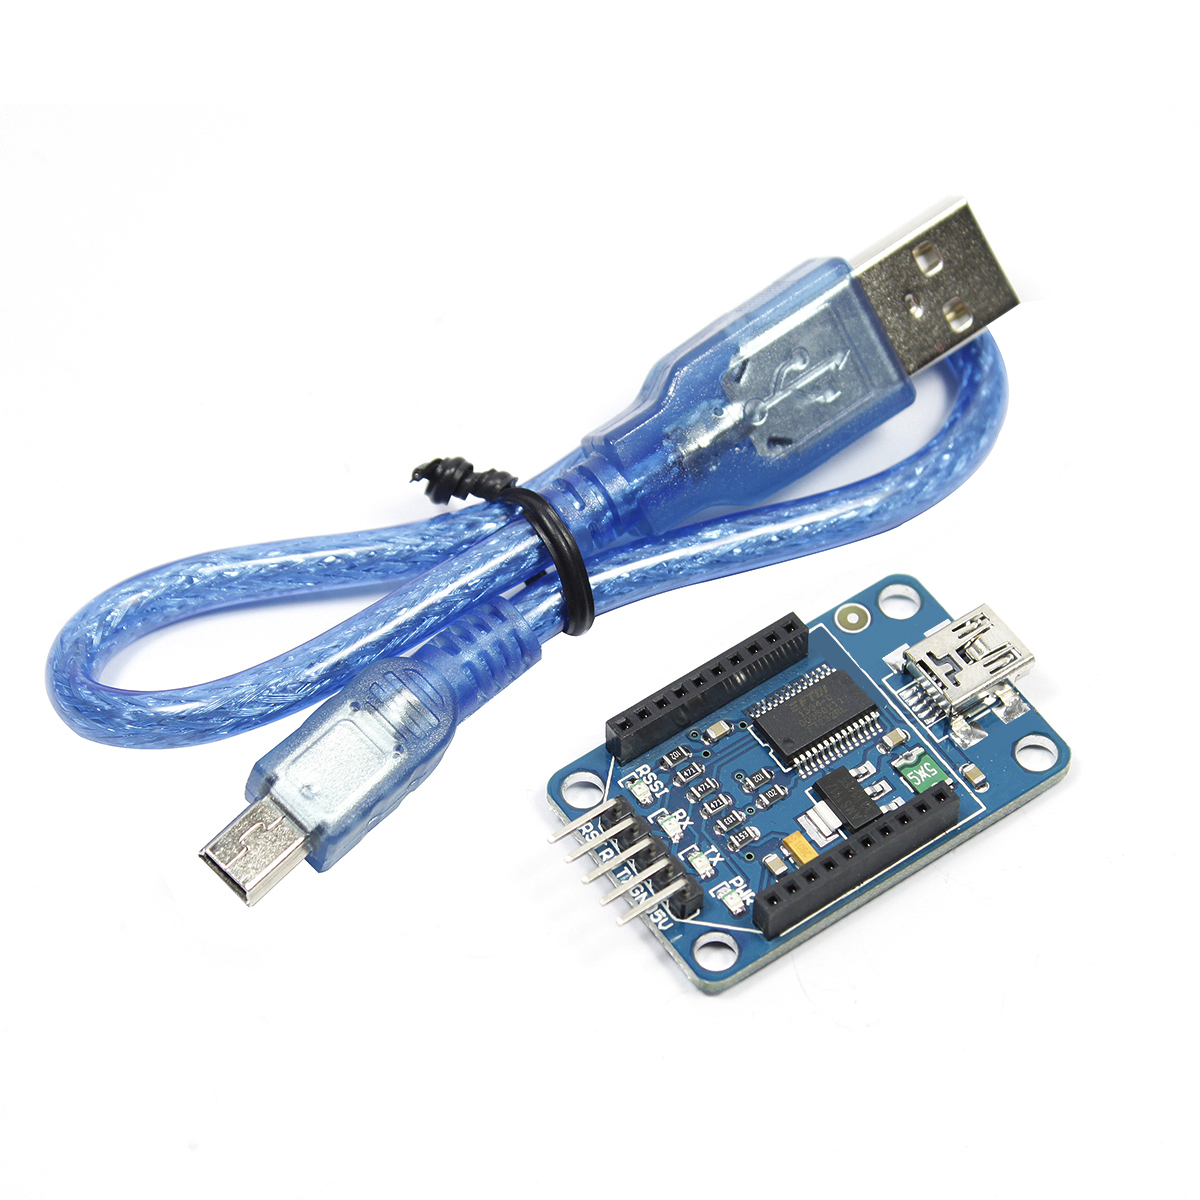 Xbee USB Adapter Module with mini USB cable for your project DIY 